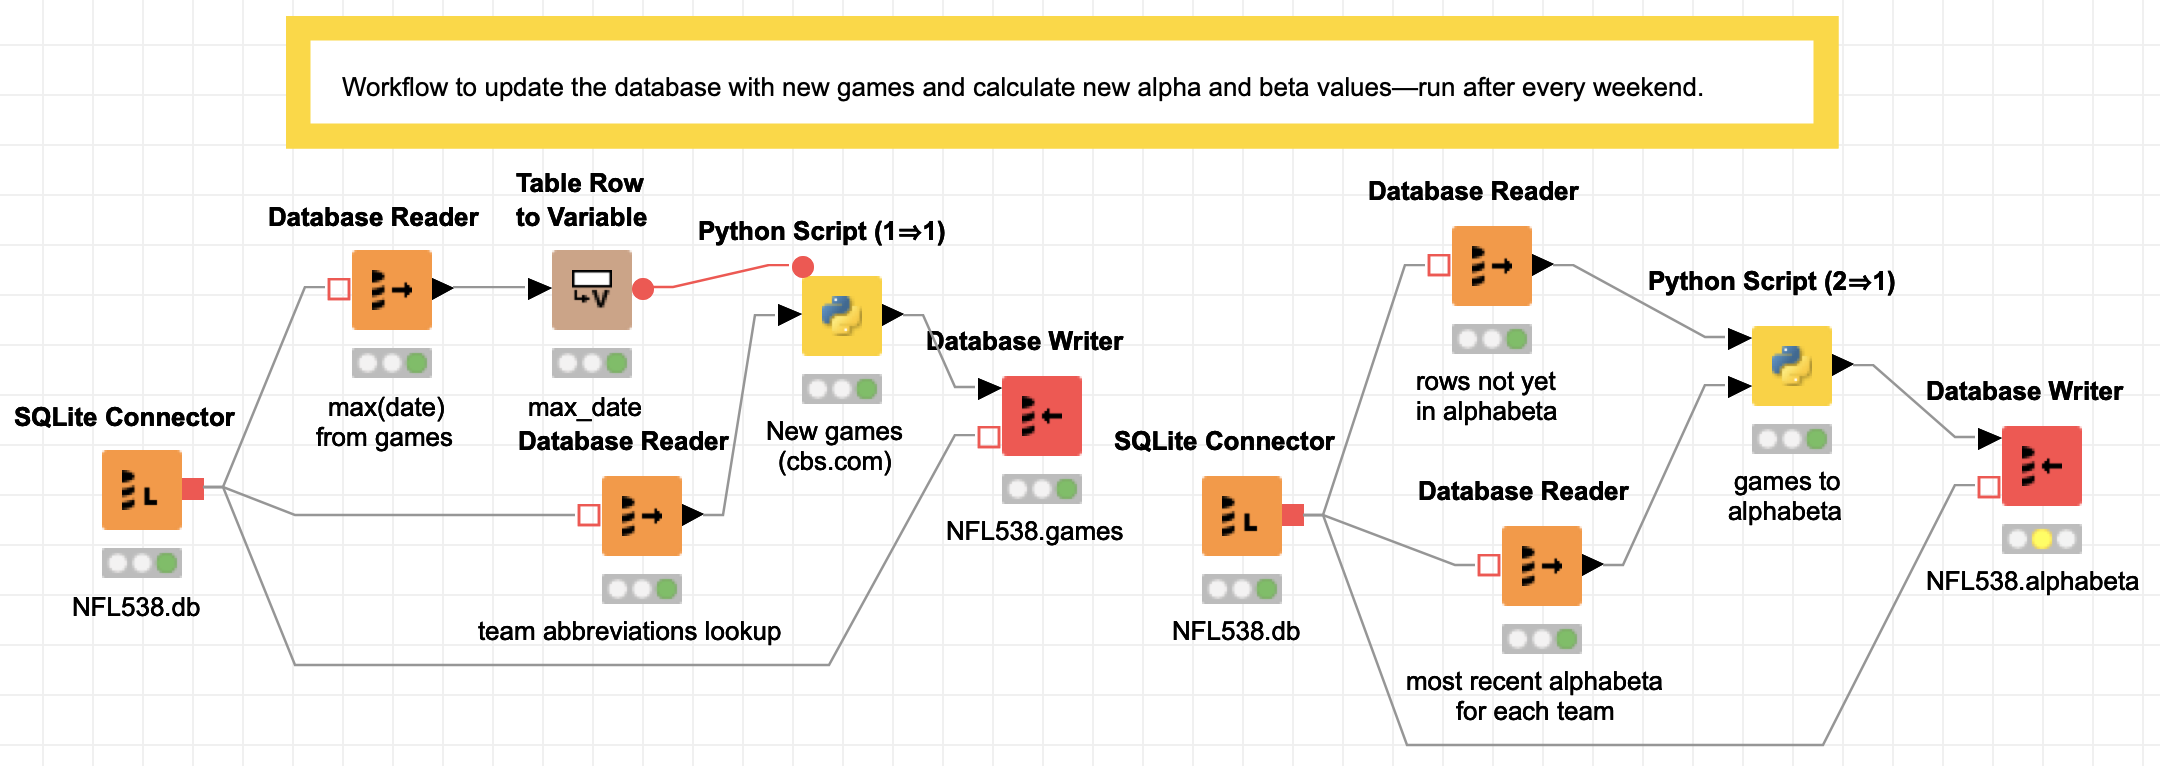 There is a text label that says 'Workflow to update the database with new games and calculate new alpha and beta values—run after every weekend.' The image also contains two separate sets of connected nodes that were already described in the text paragraph.